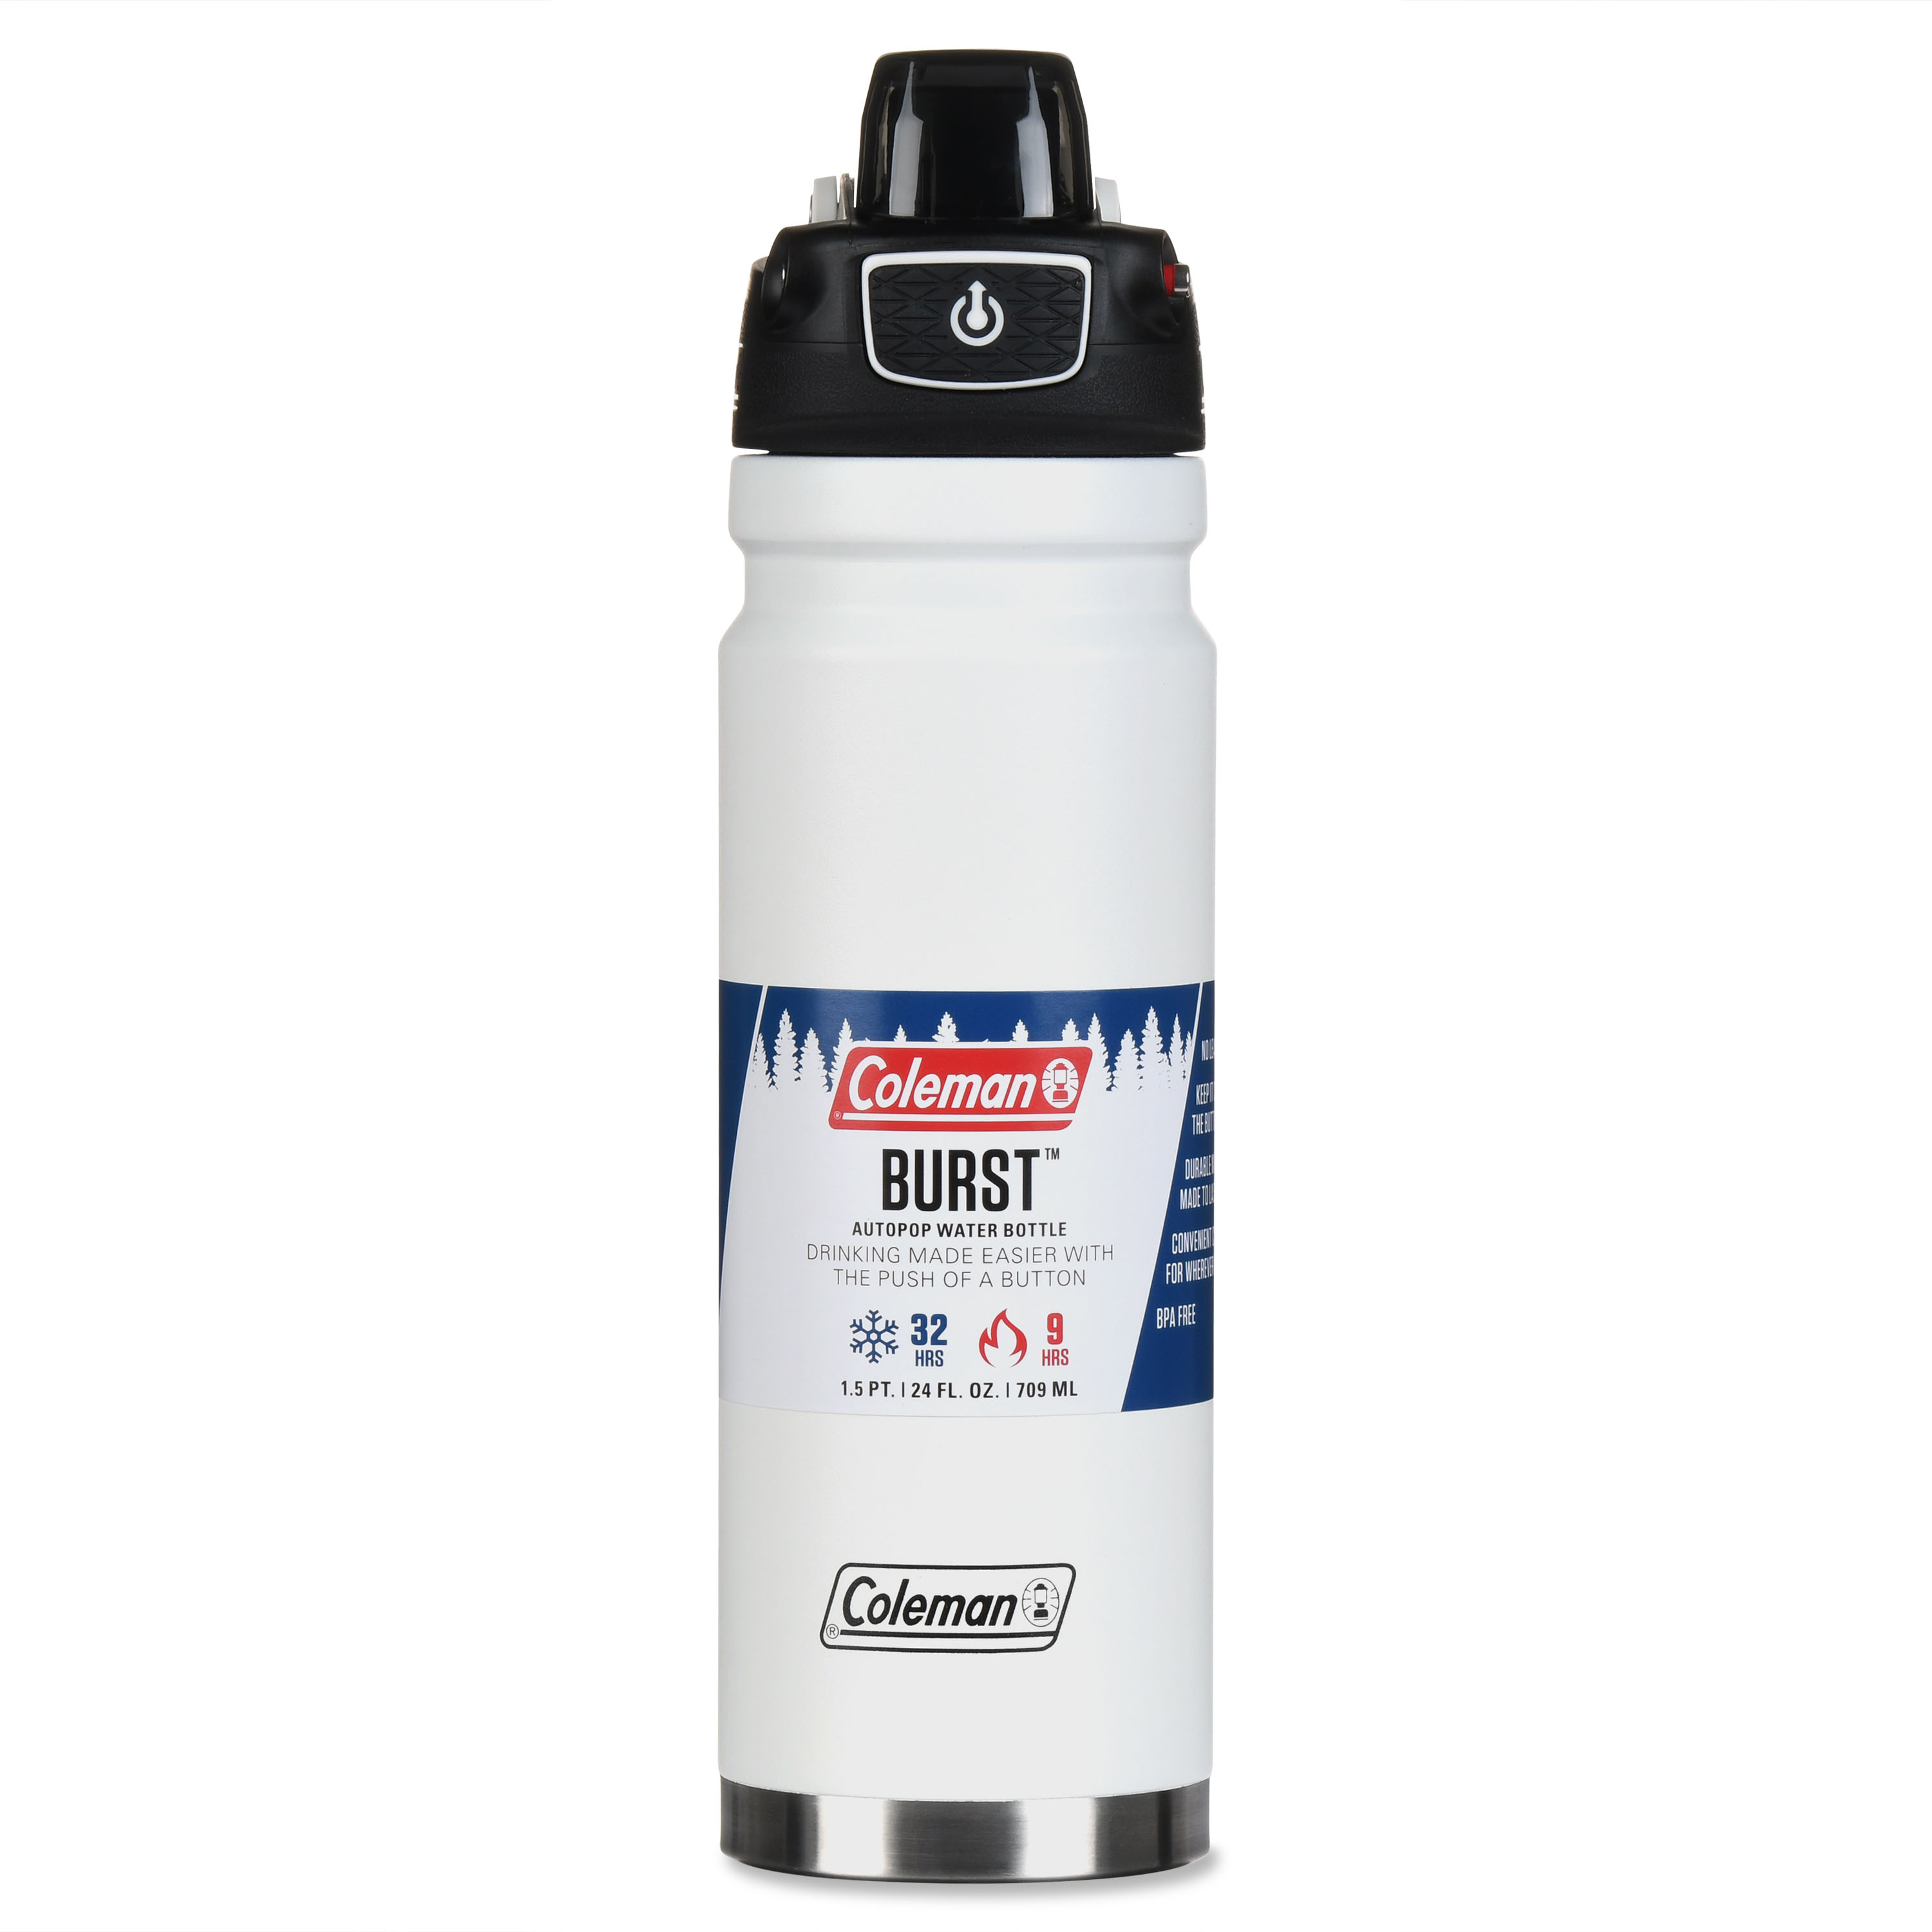 Coleman Burst Poptop Stainless Steel Insulated Water Bottle, 24 oz., White Cloud Color - image 4 of 8